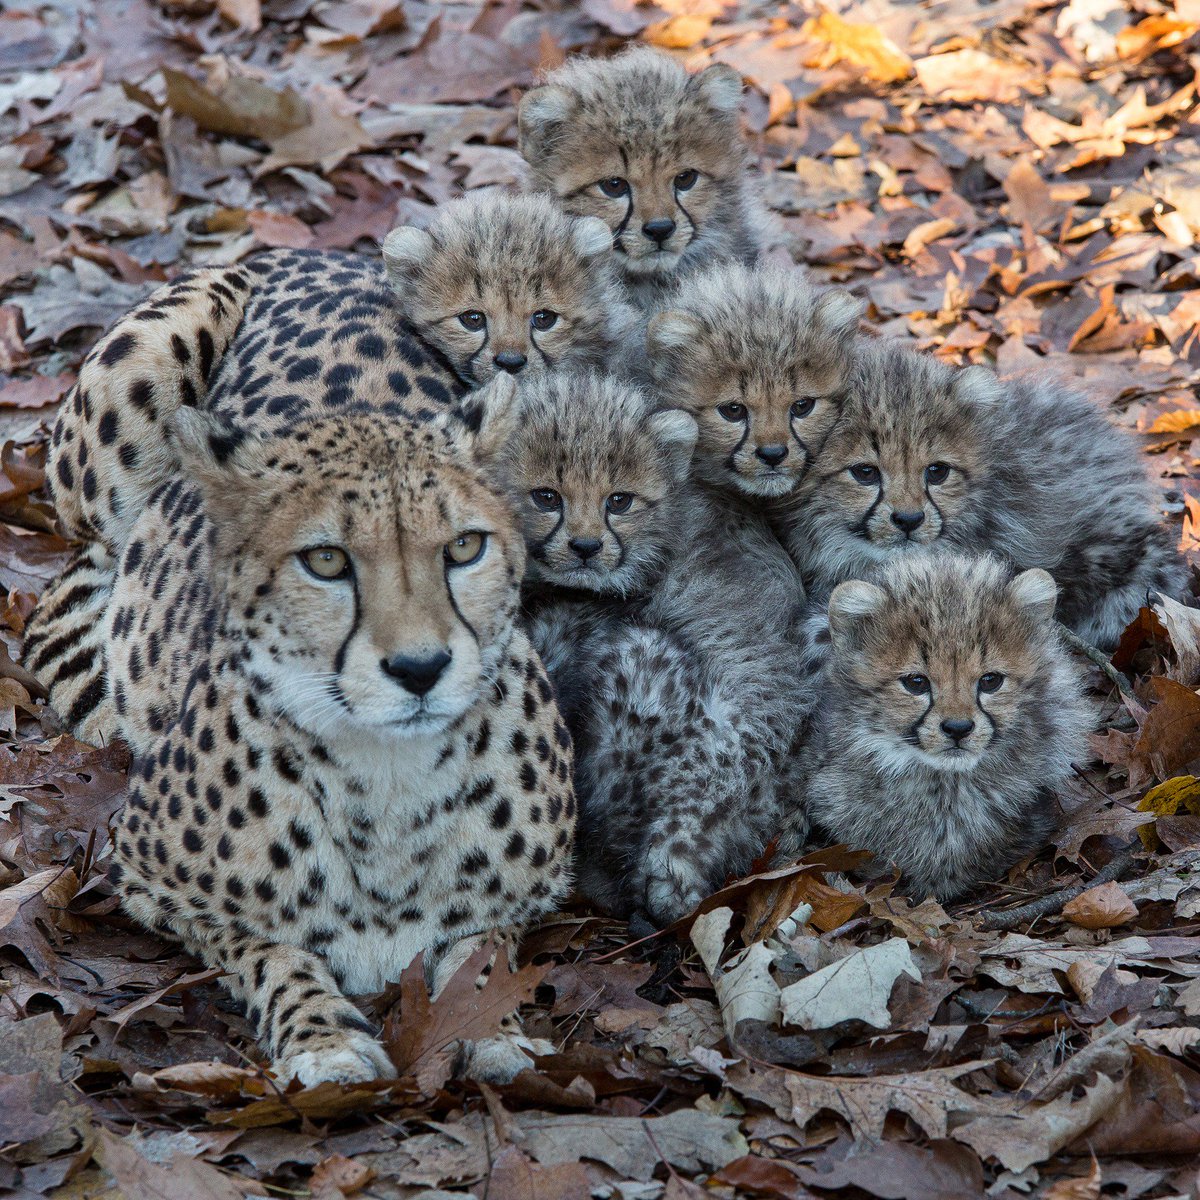 Cute picture of Cheetah and her cubs